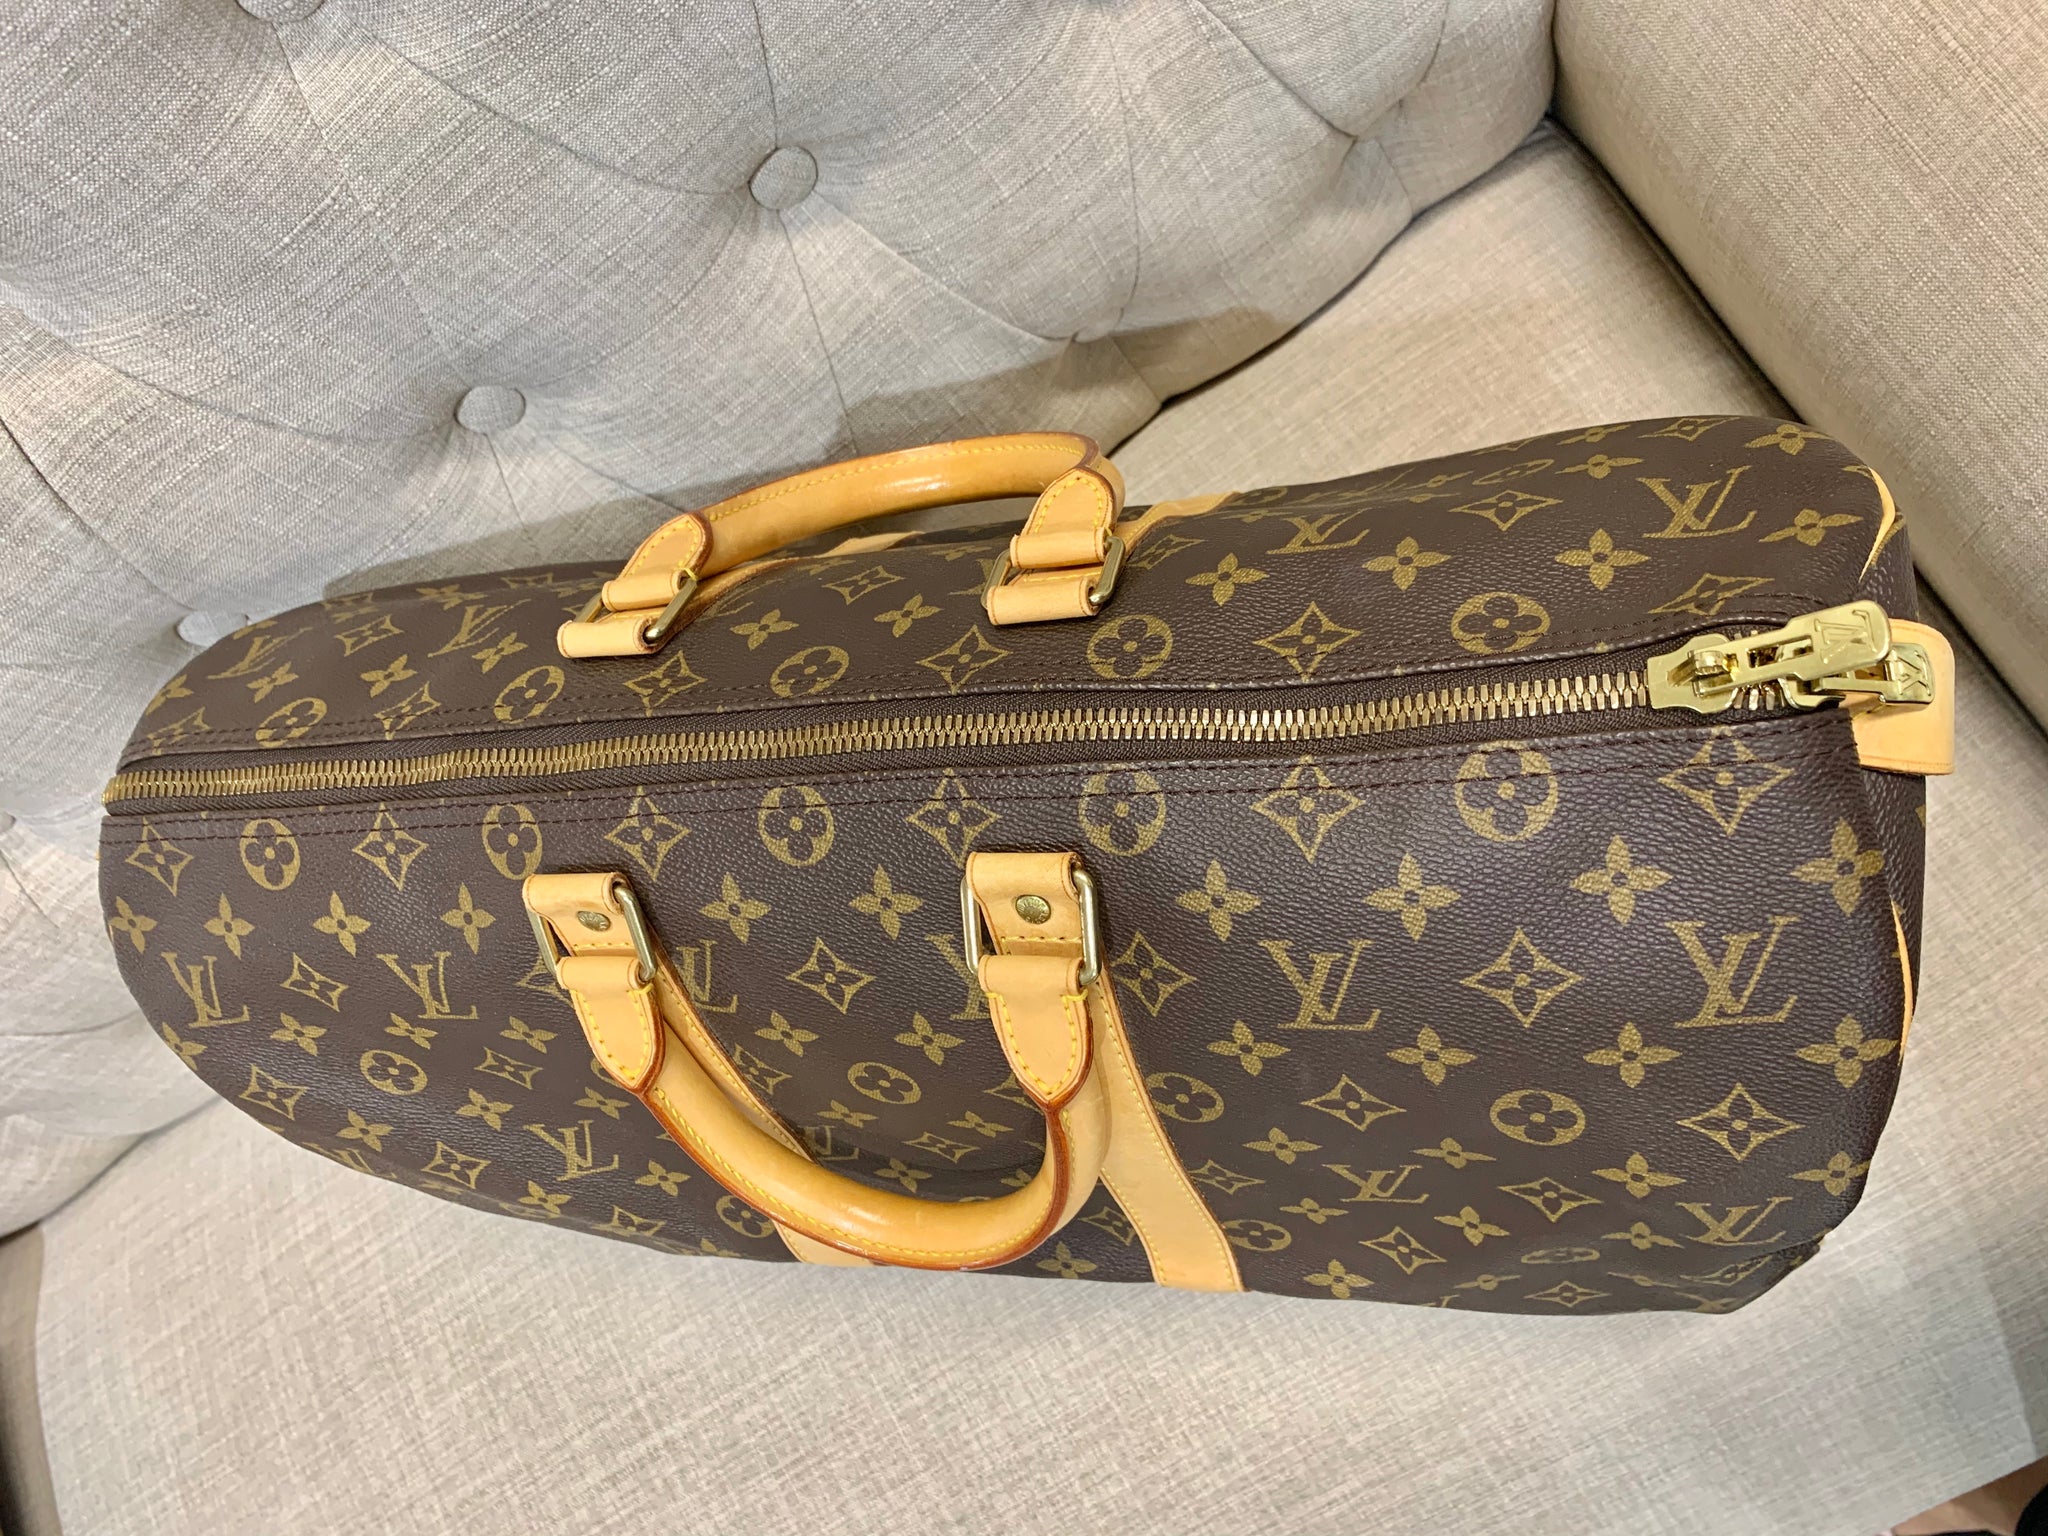 AUTHENTICATED LOUIS VUITTON MONOGRAM KEEPALL 55